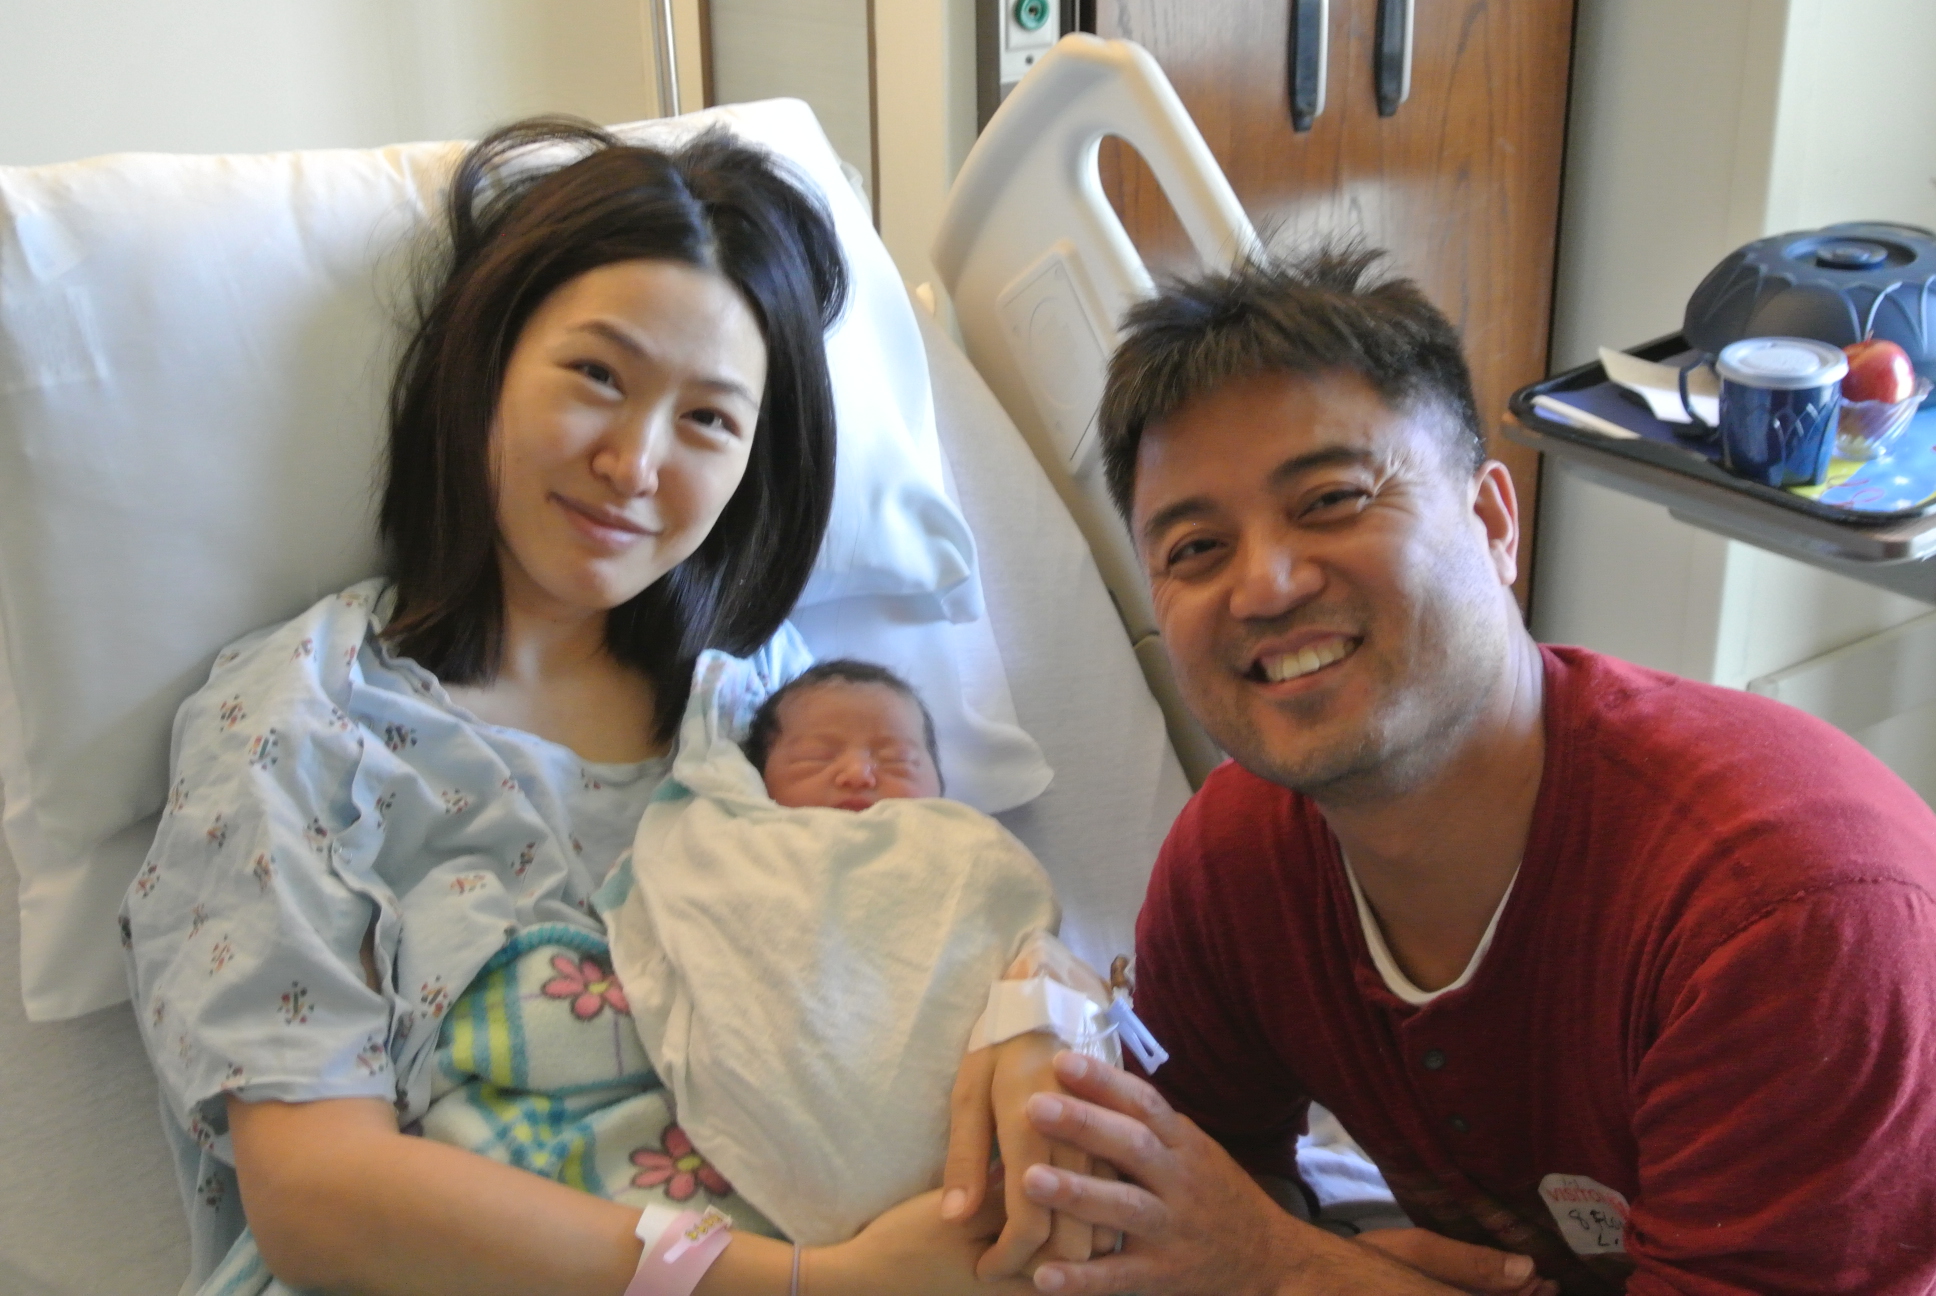 The first Korean baby born in Los Angeles in 2014 was named Ye-ju by her father Kim Hyo-young, 42, and mother Lee Sun-nam, 30, of La Mirada, California. (Jung Gu-hoon)